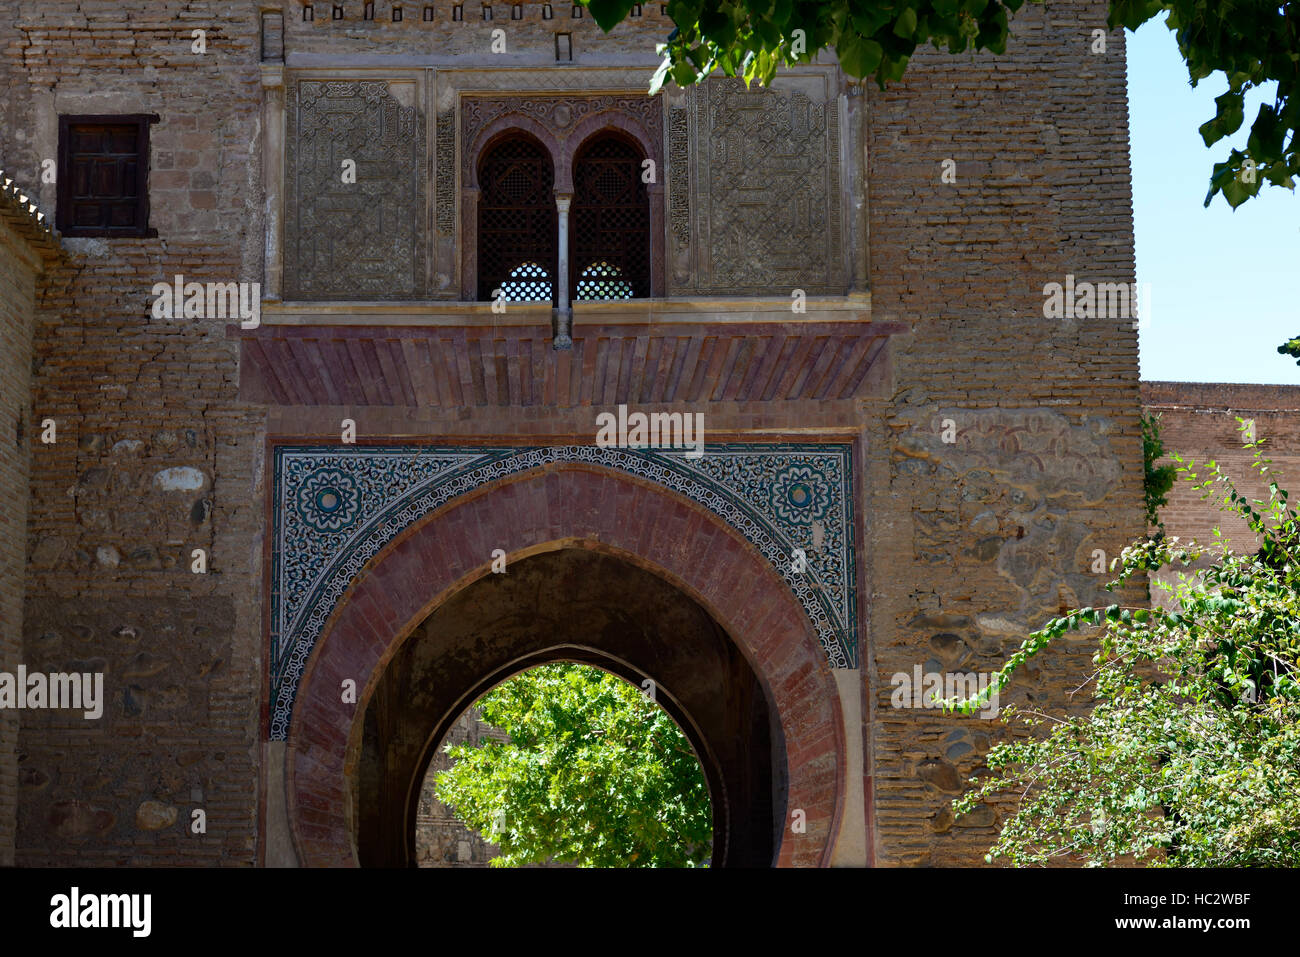 Wine Gate Puerta del Vino Carlos V Palace Alhambra Palace Gardens alcazaba arch arched gateway Granada Andalucia Spain RM Floral Stock Photo